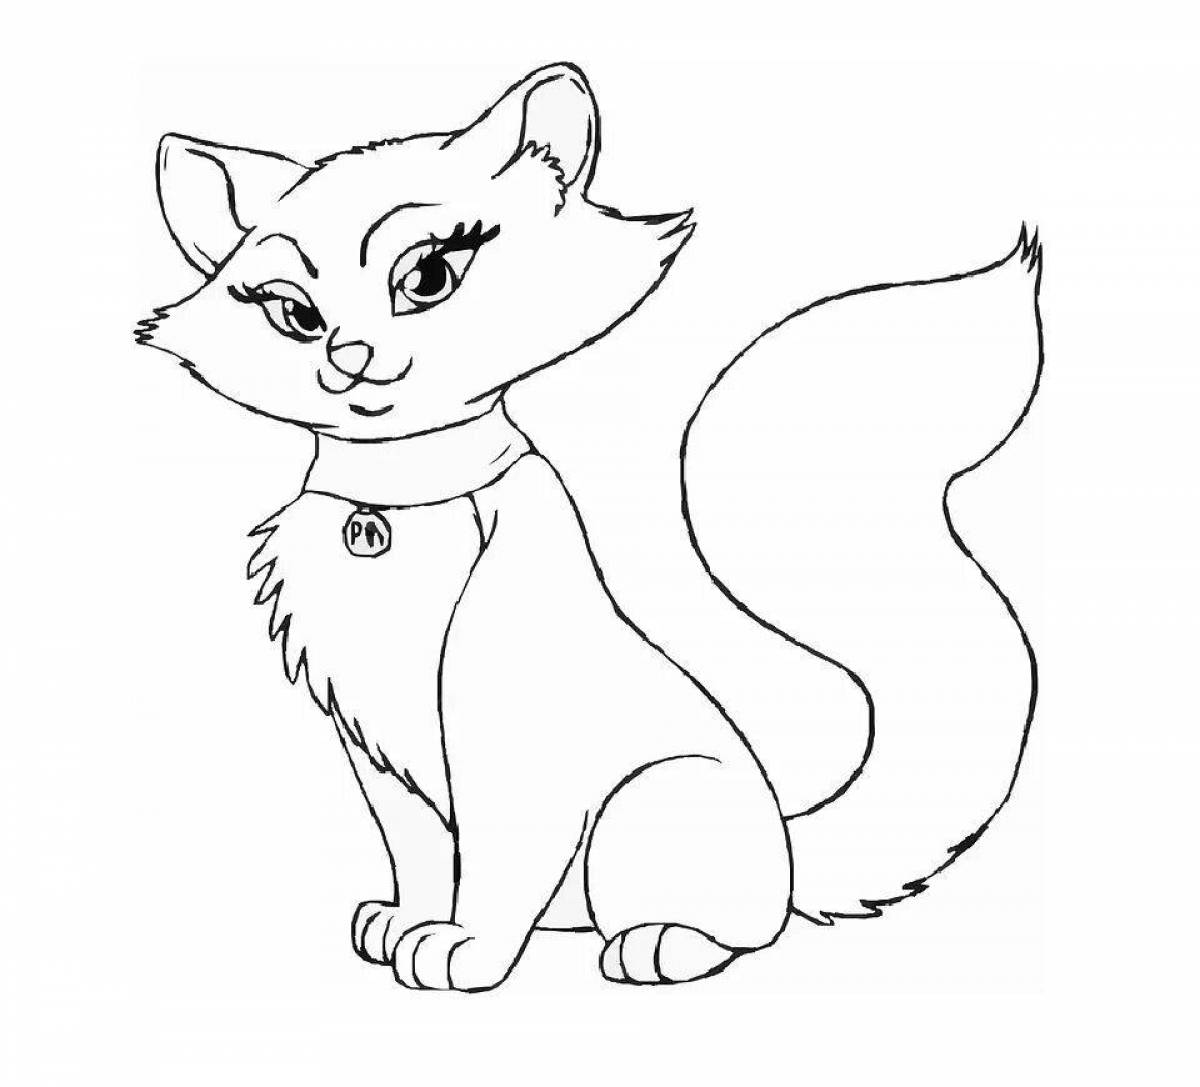 Coloring page adorable big cat